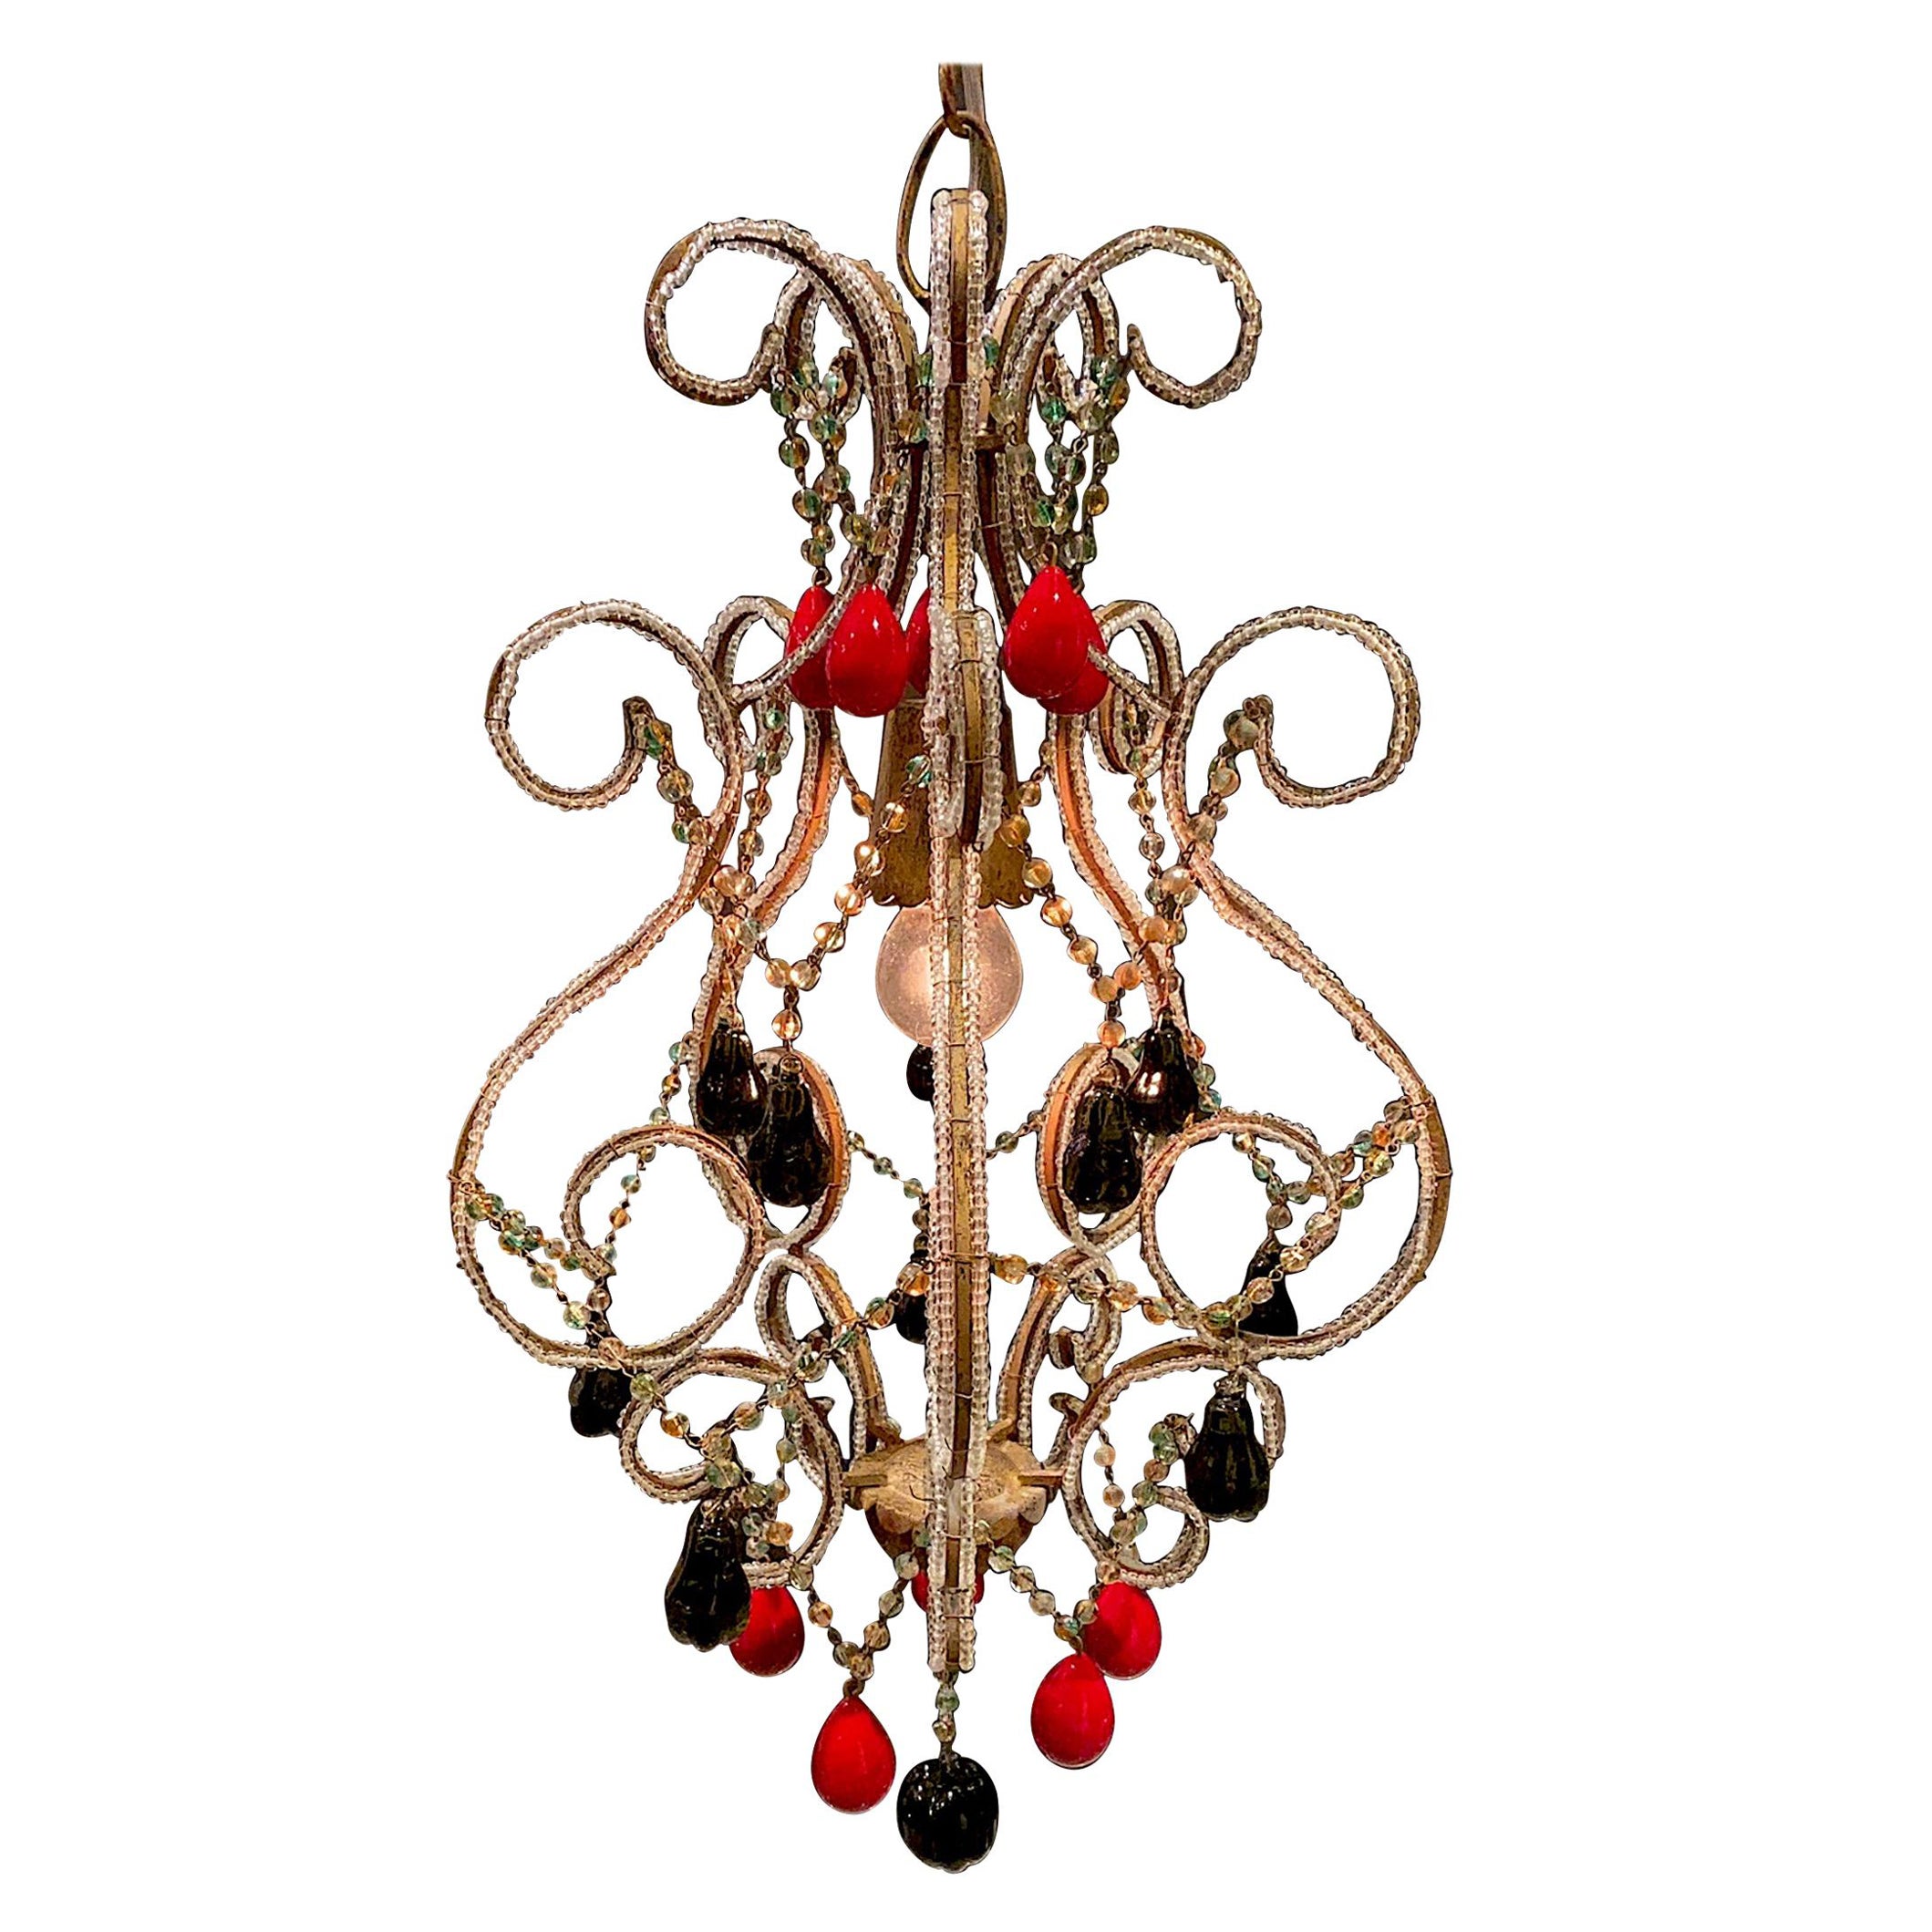 Italian 1950s Hollywood Regency Pendant Light with Venetian Fruits and Beads